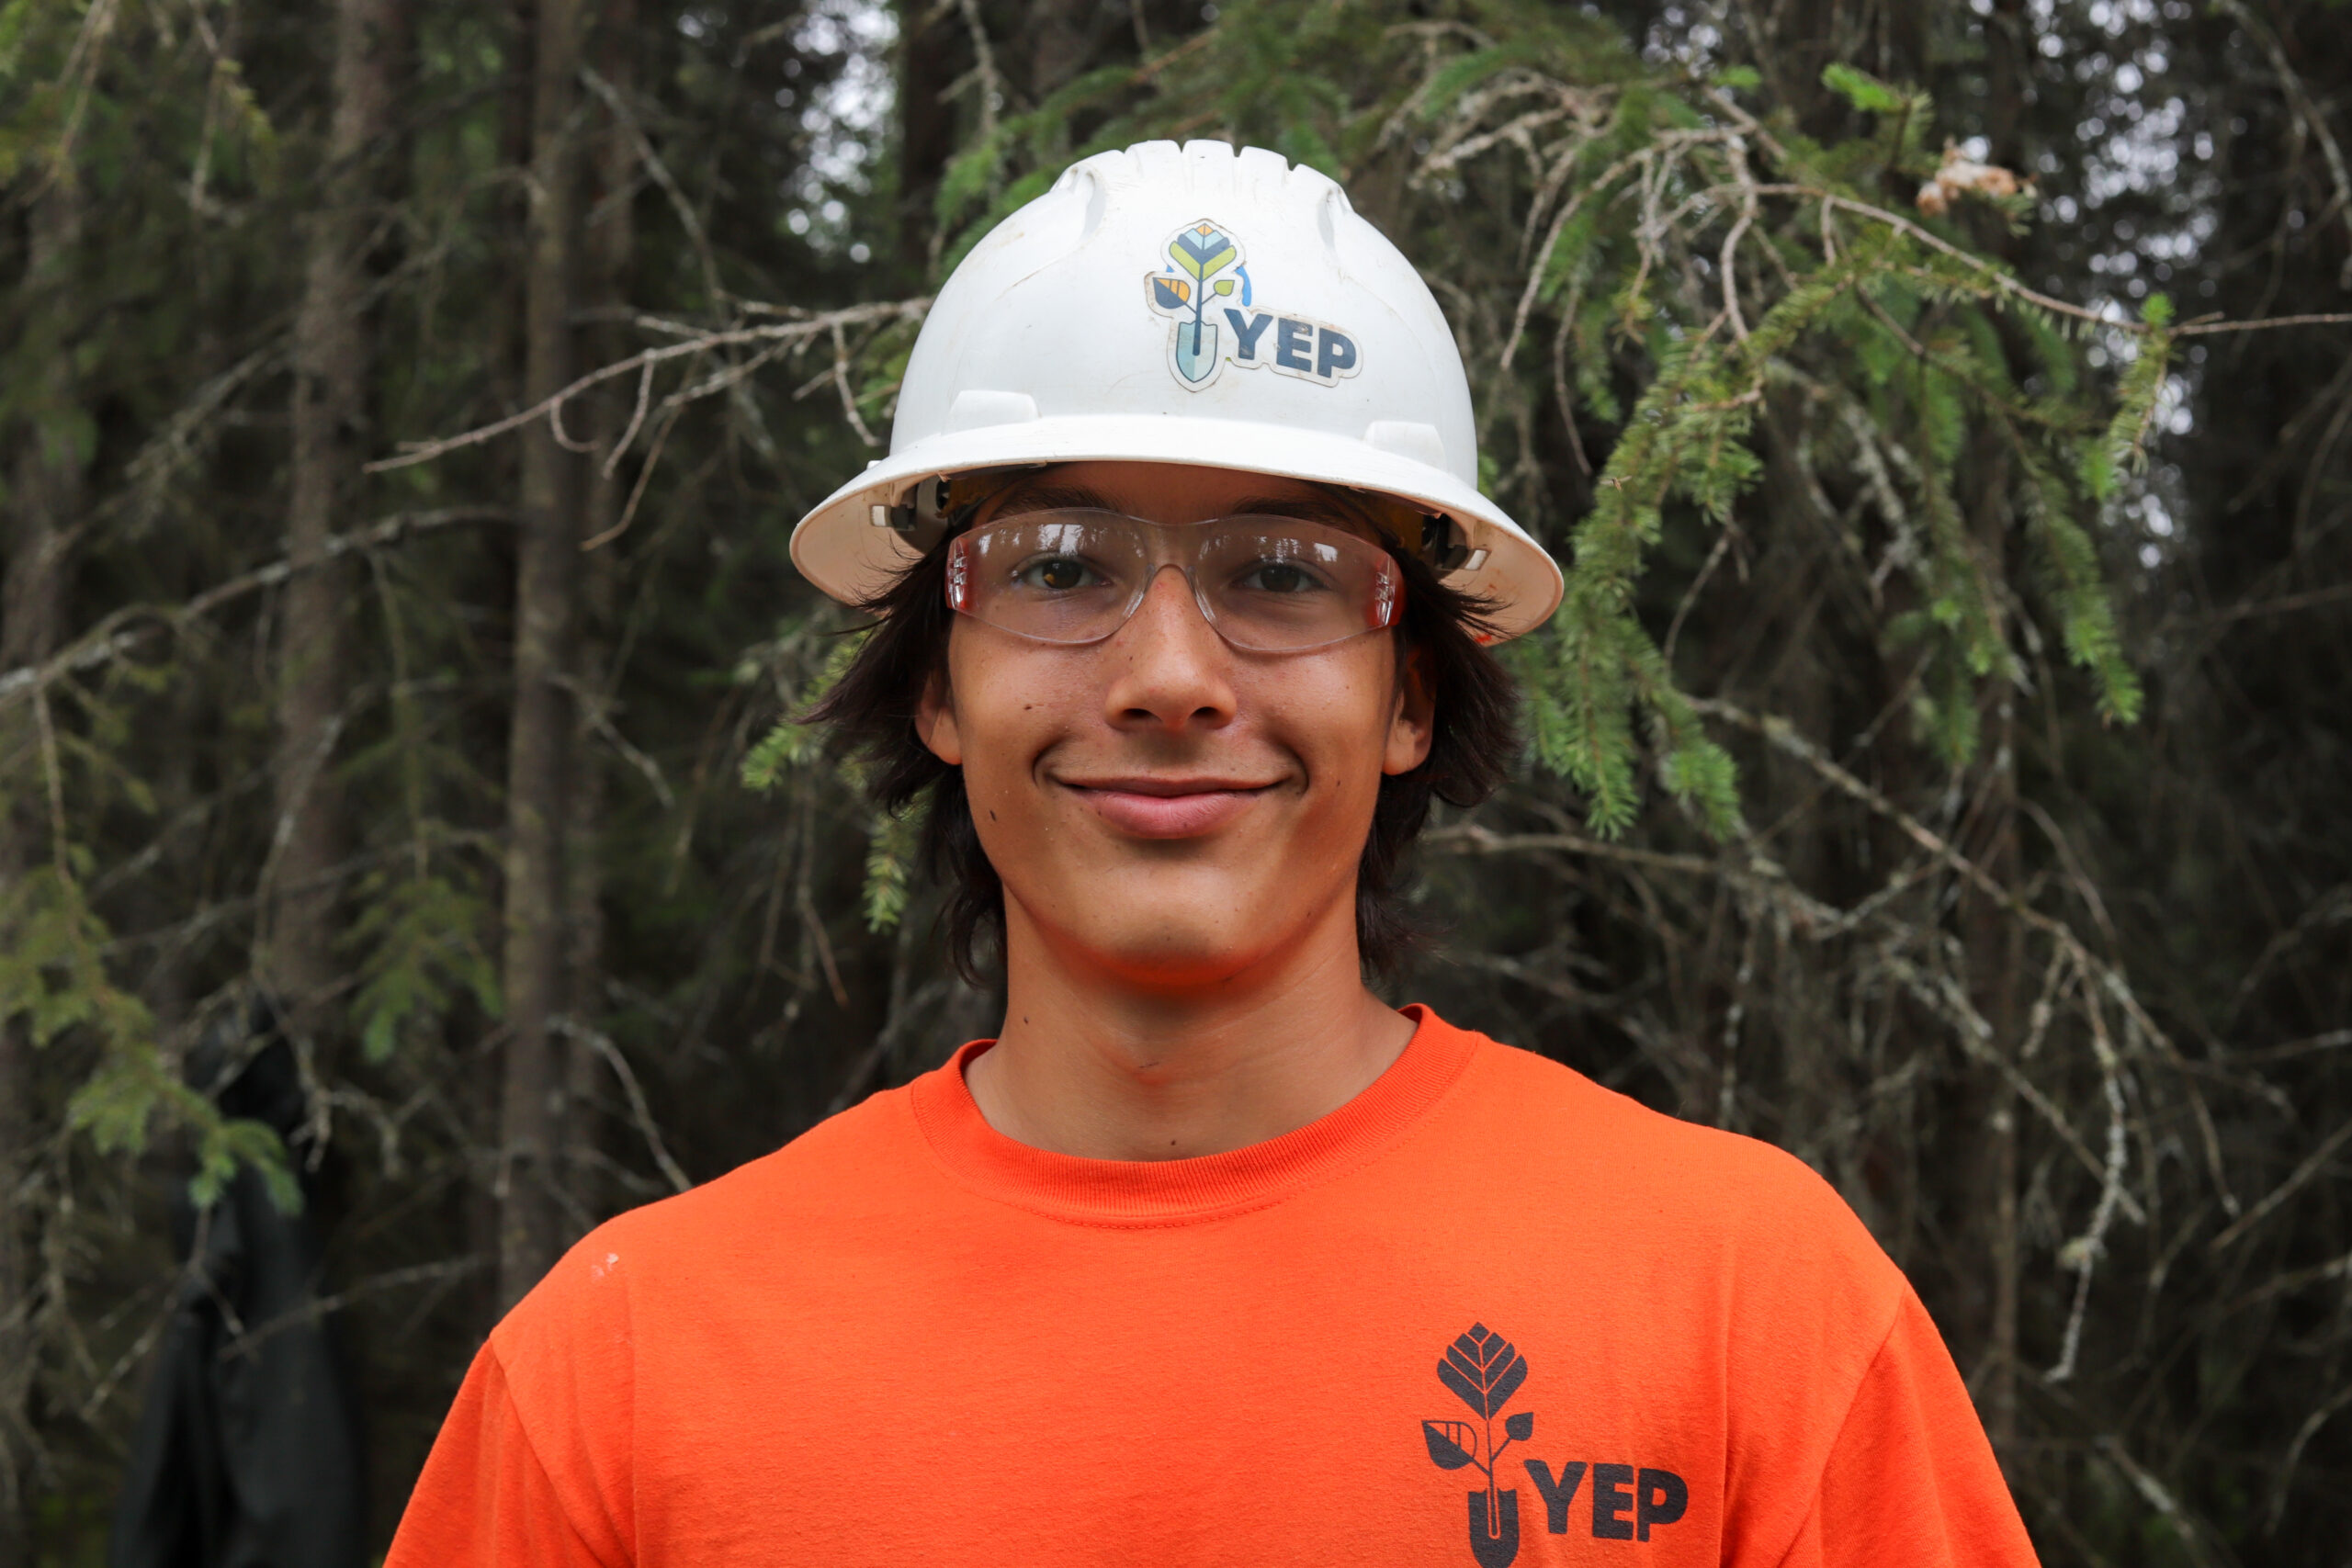 Close up of a person with an orange shirt, safety glasses, and a hardhat in the woods.